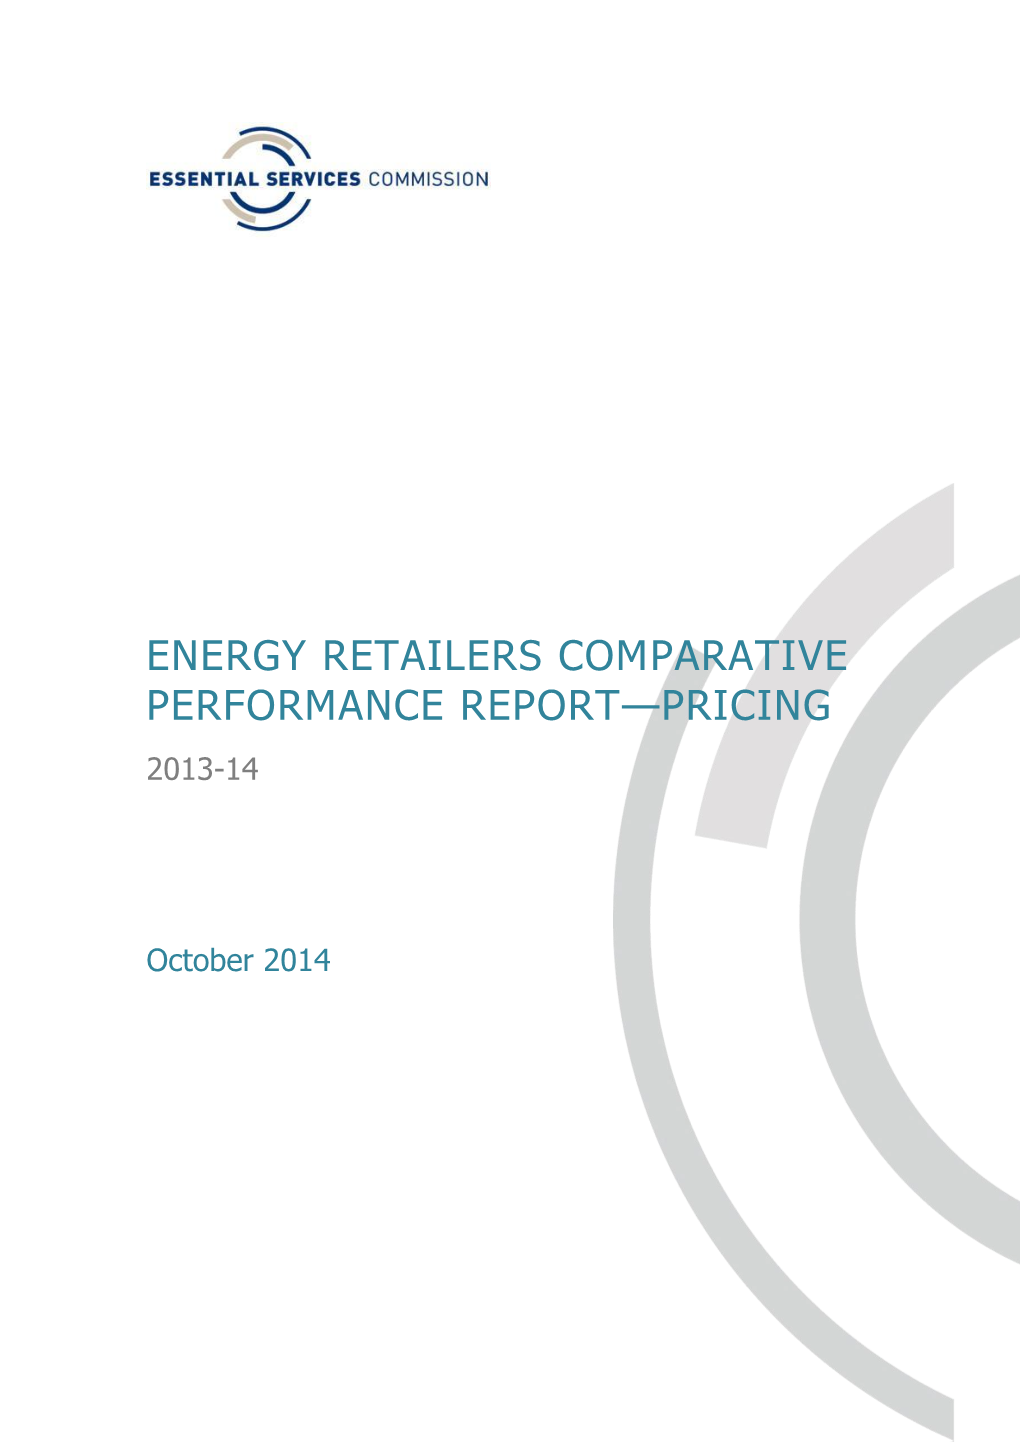 Energy Retailers Comparative Performance Report—Pricing 2013-14